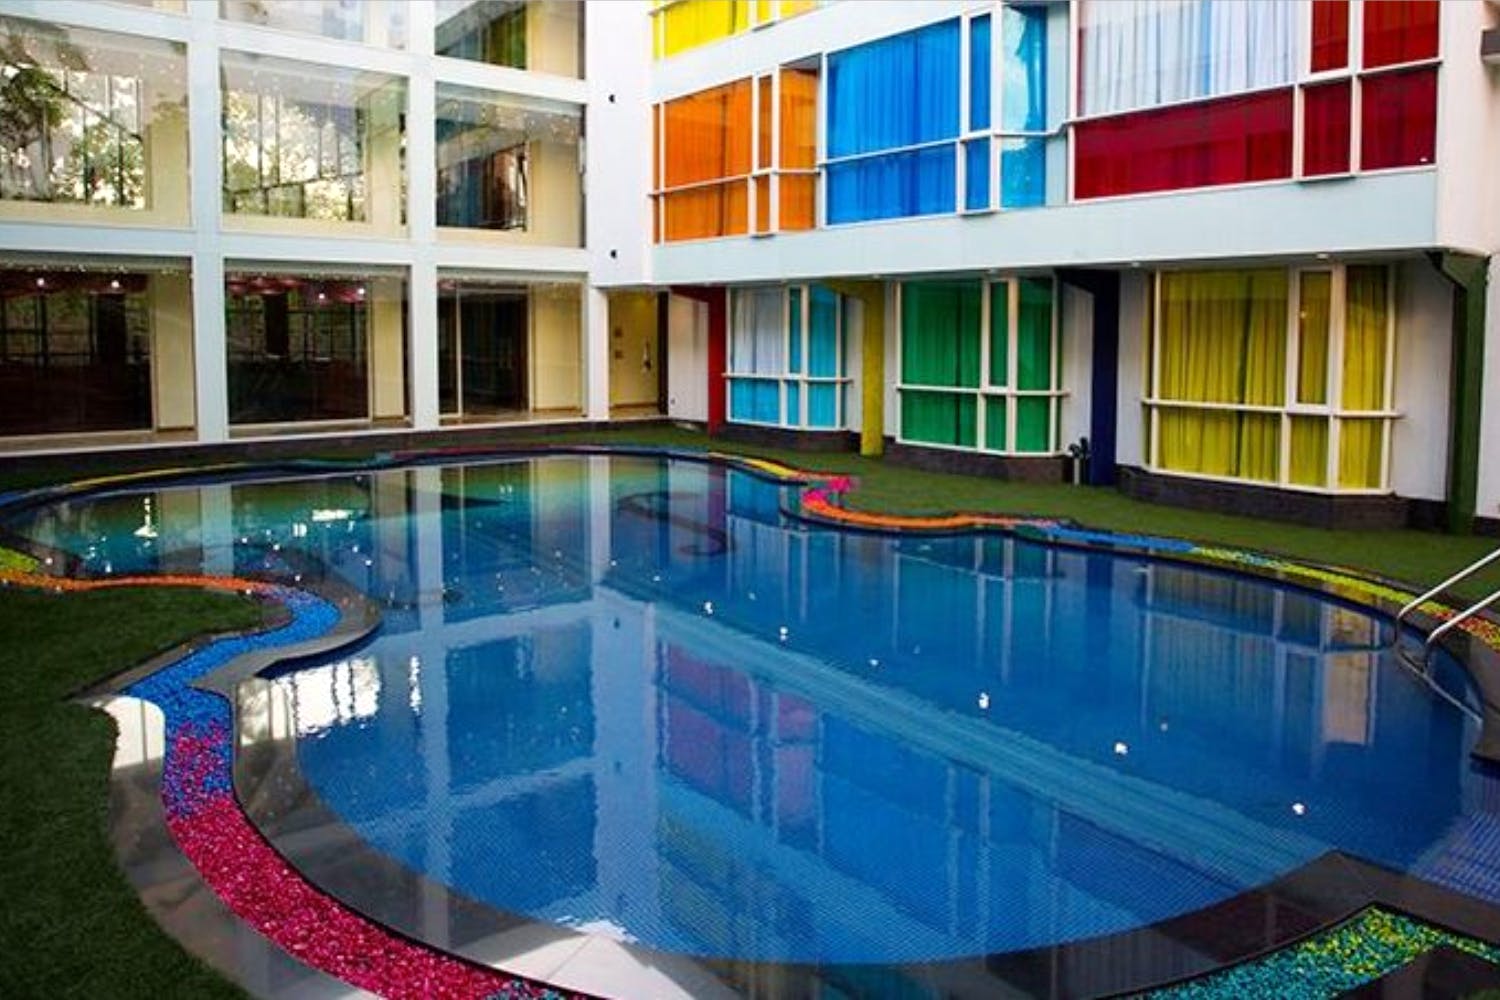 Swimming pool,Property,Building,Resort,Real estate,Leisure centre,Architecture,Hotel,Leisure,House